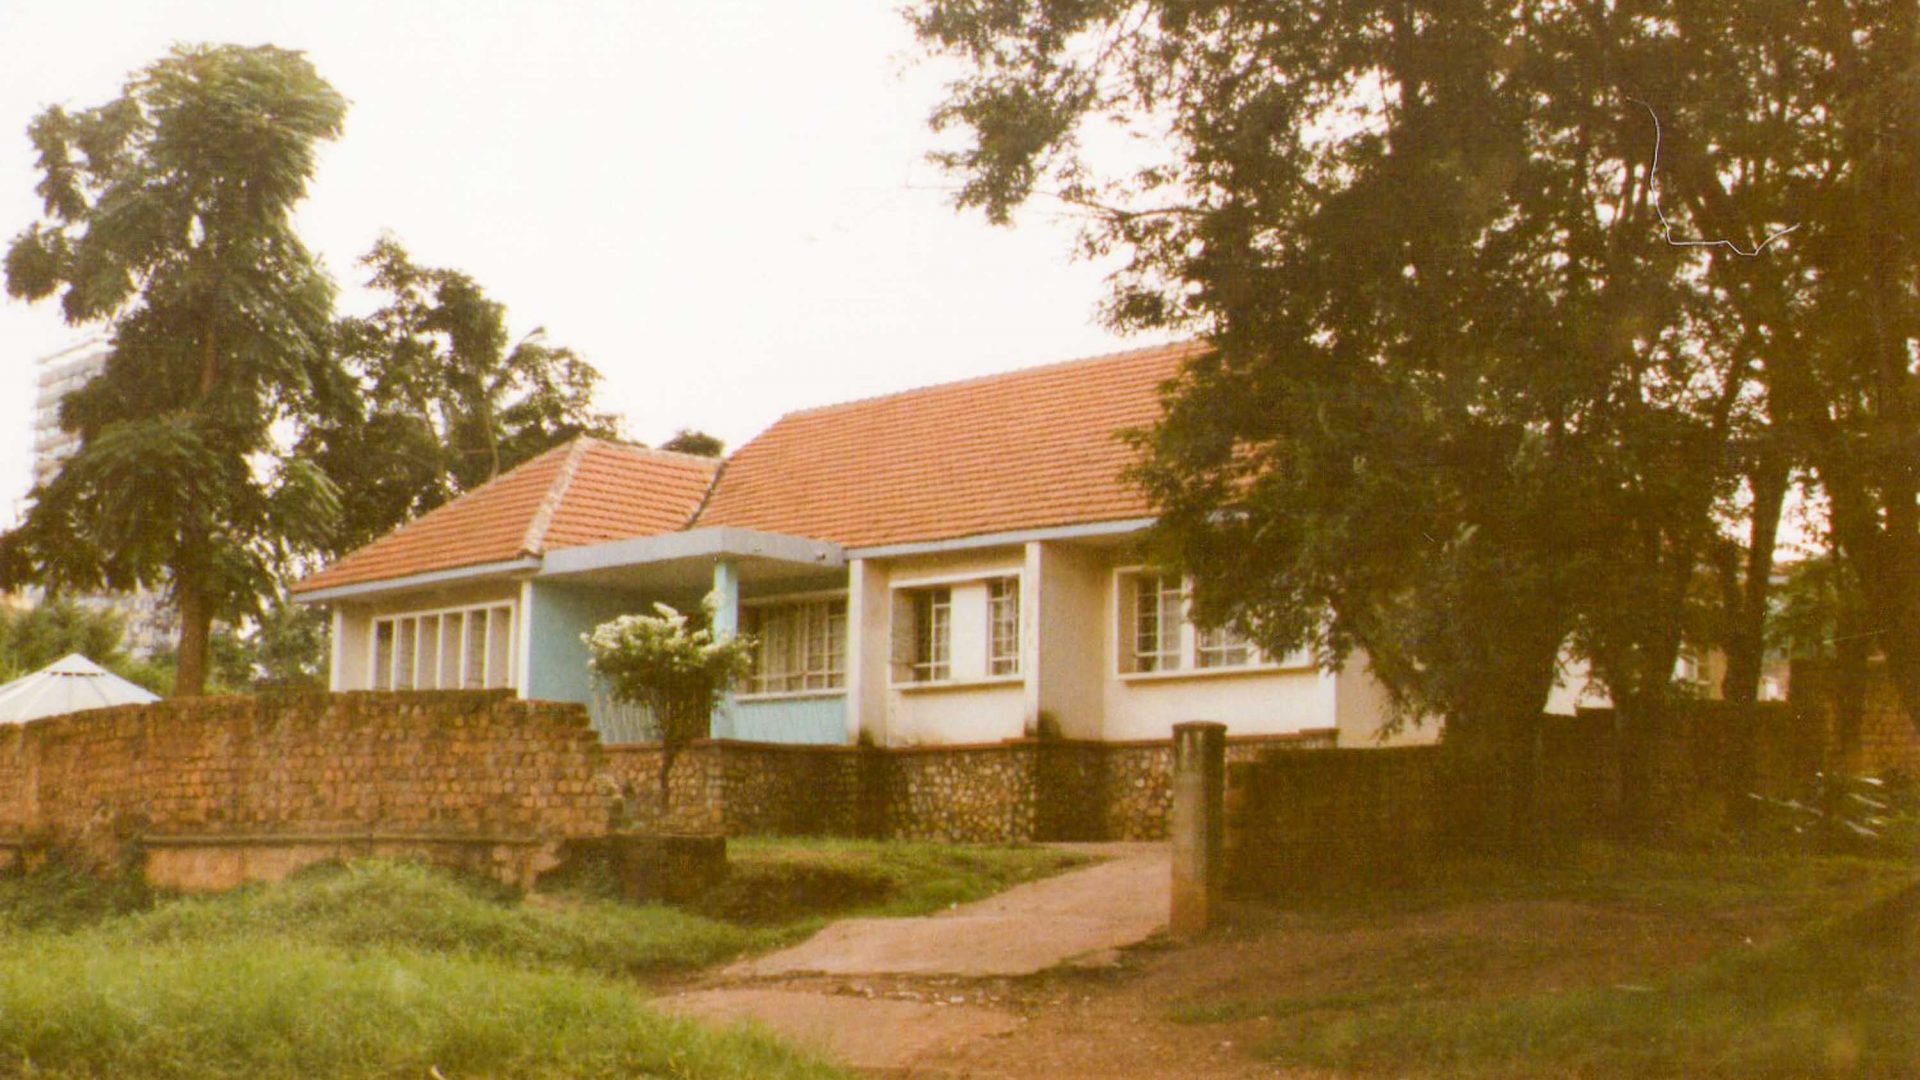 An old photo of a blue and white home with a tree out the front.